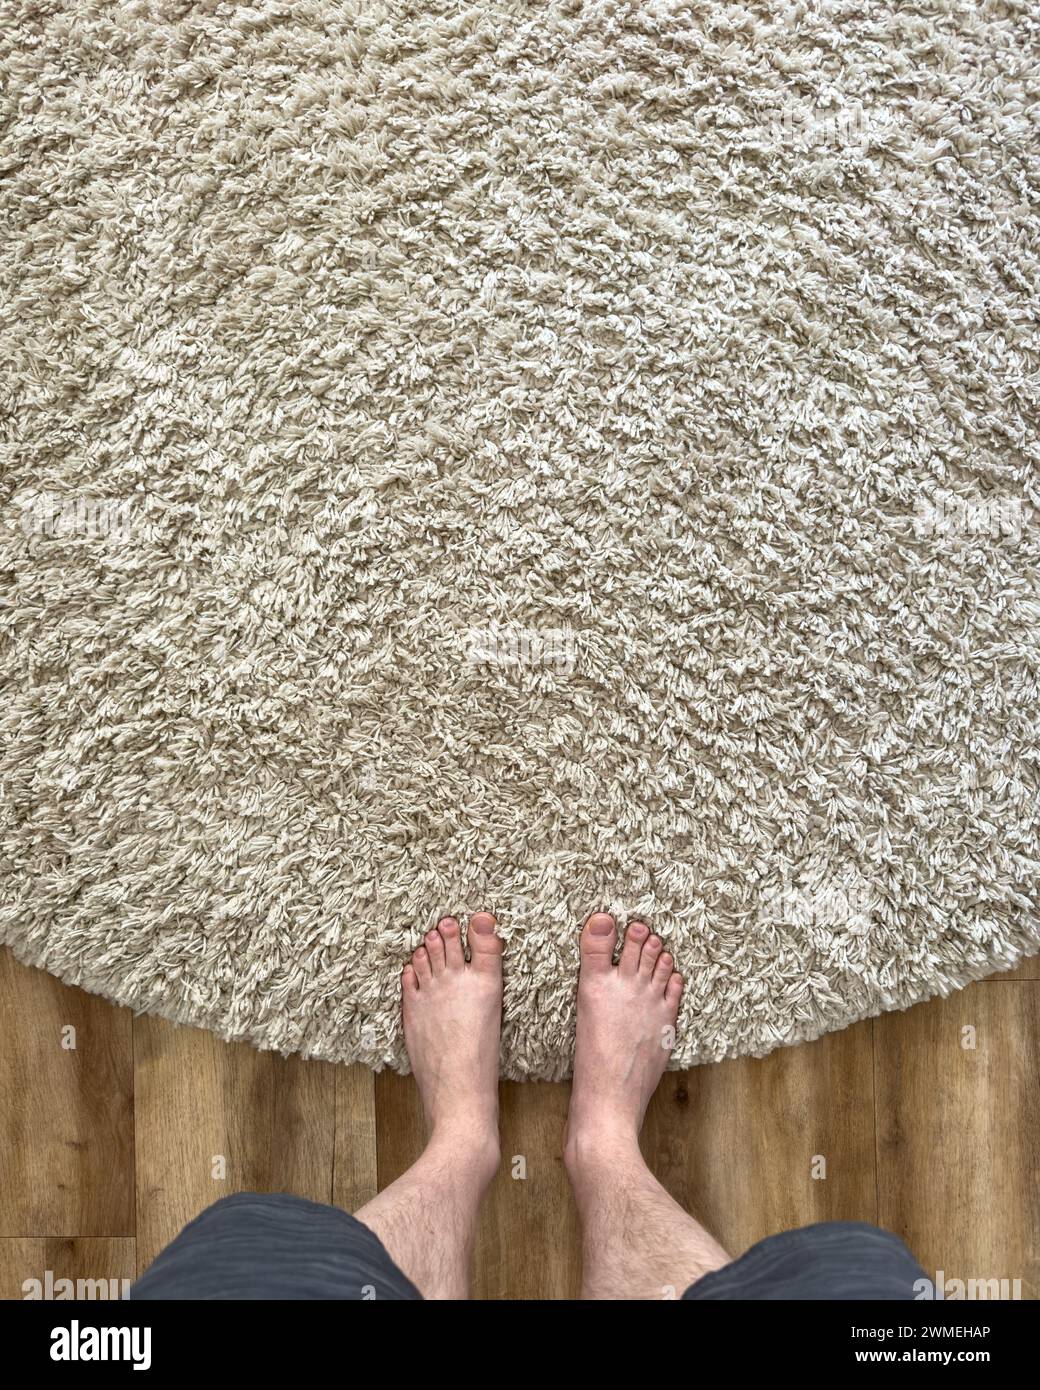 Top view of feet on a beige coloured shag pile floor with timber floor boards Stock Photo